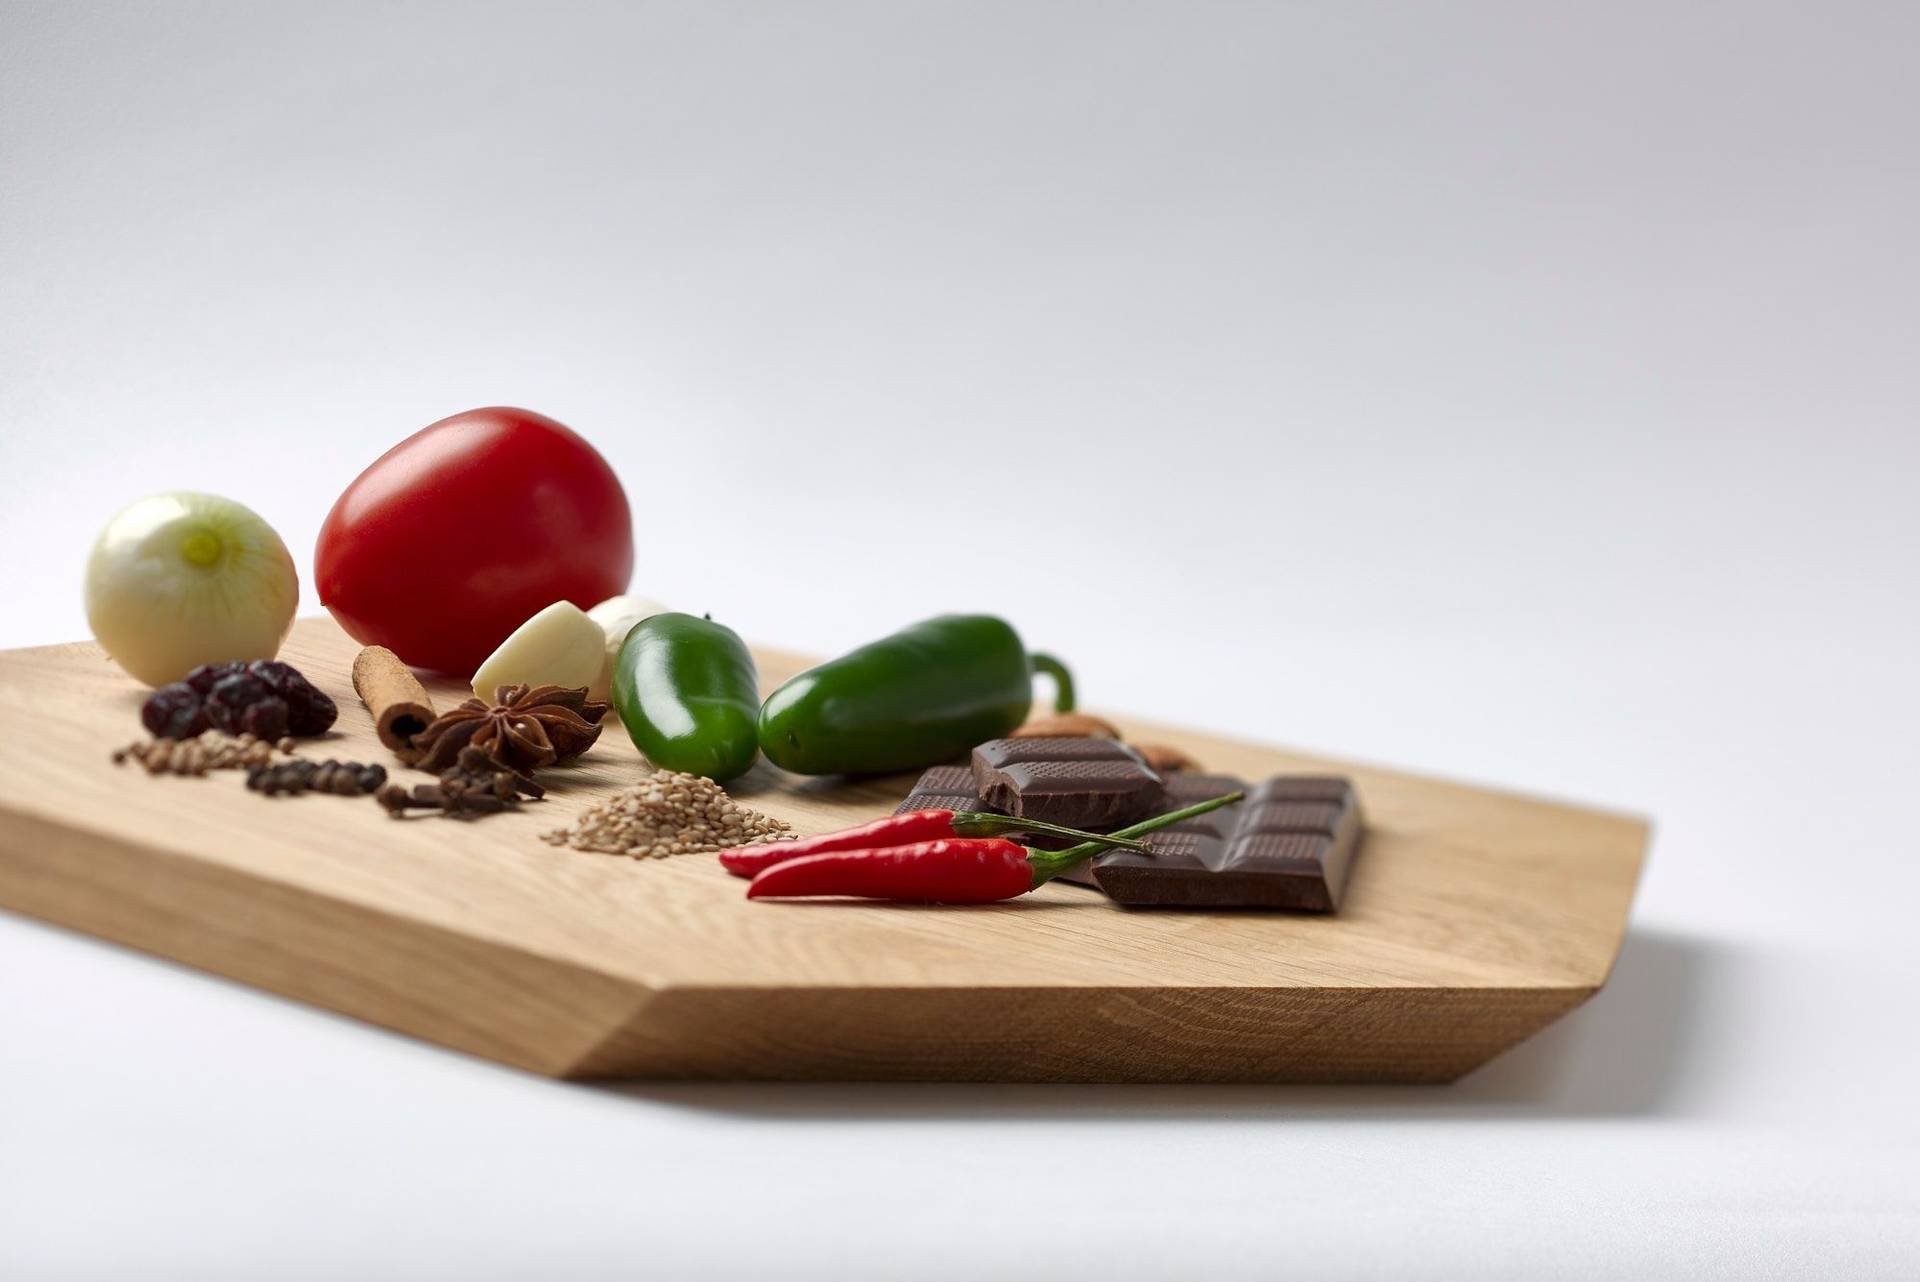 mole sauce ingredients on a wooden board with white background